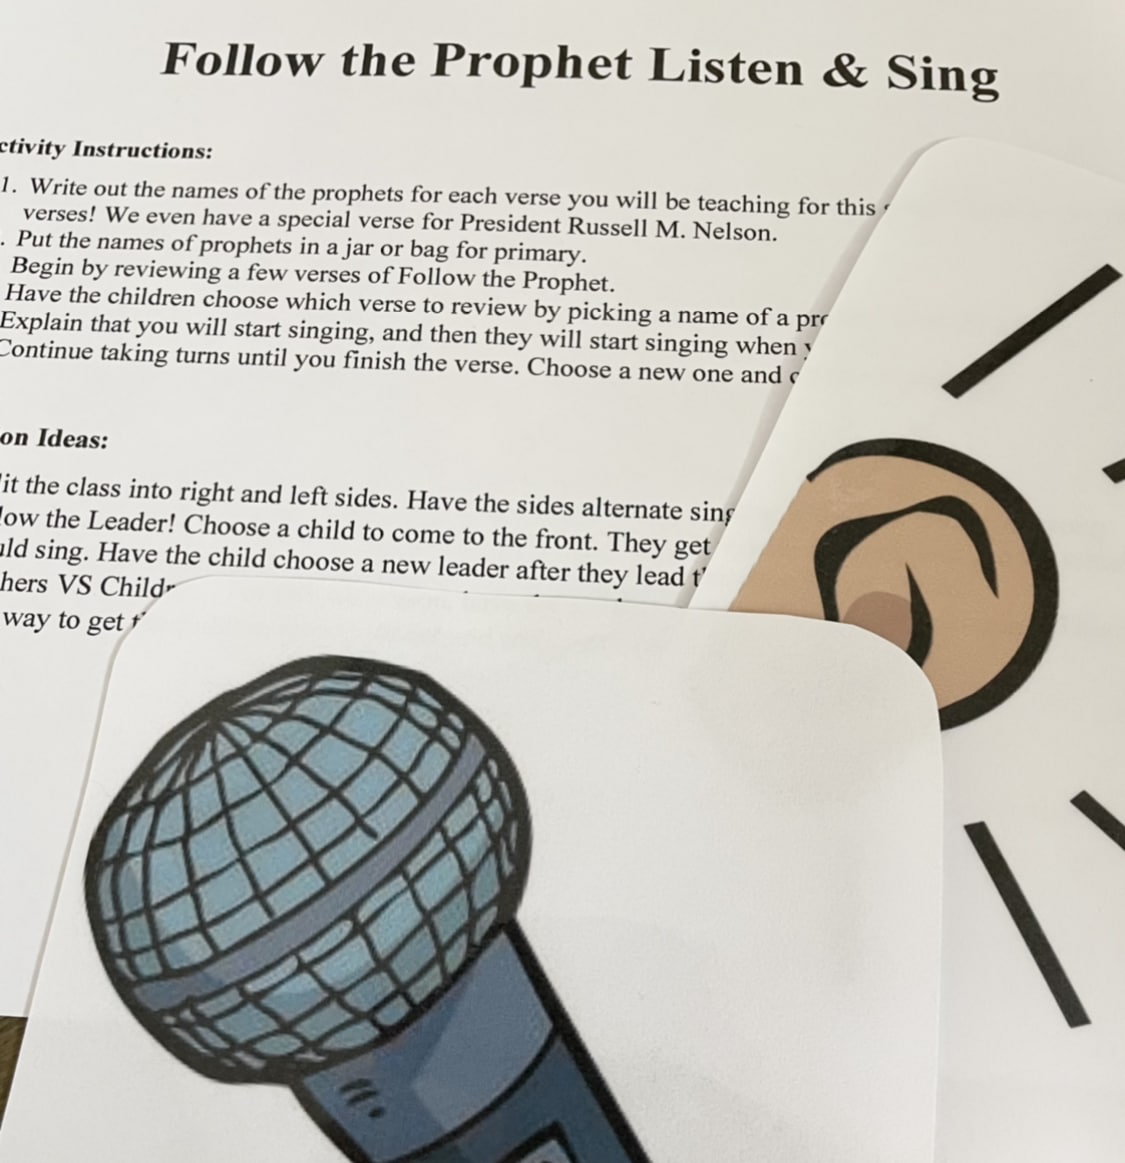 Follow the Prophet Listen & Sing Easy singing time ideas for Primary Music Leaders IMG 6446